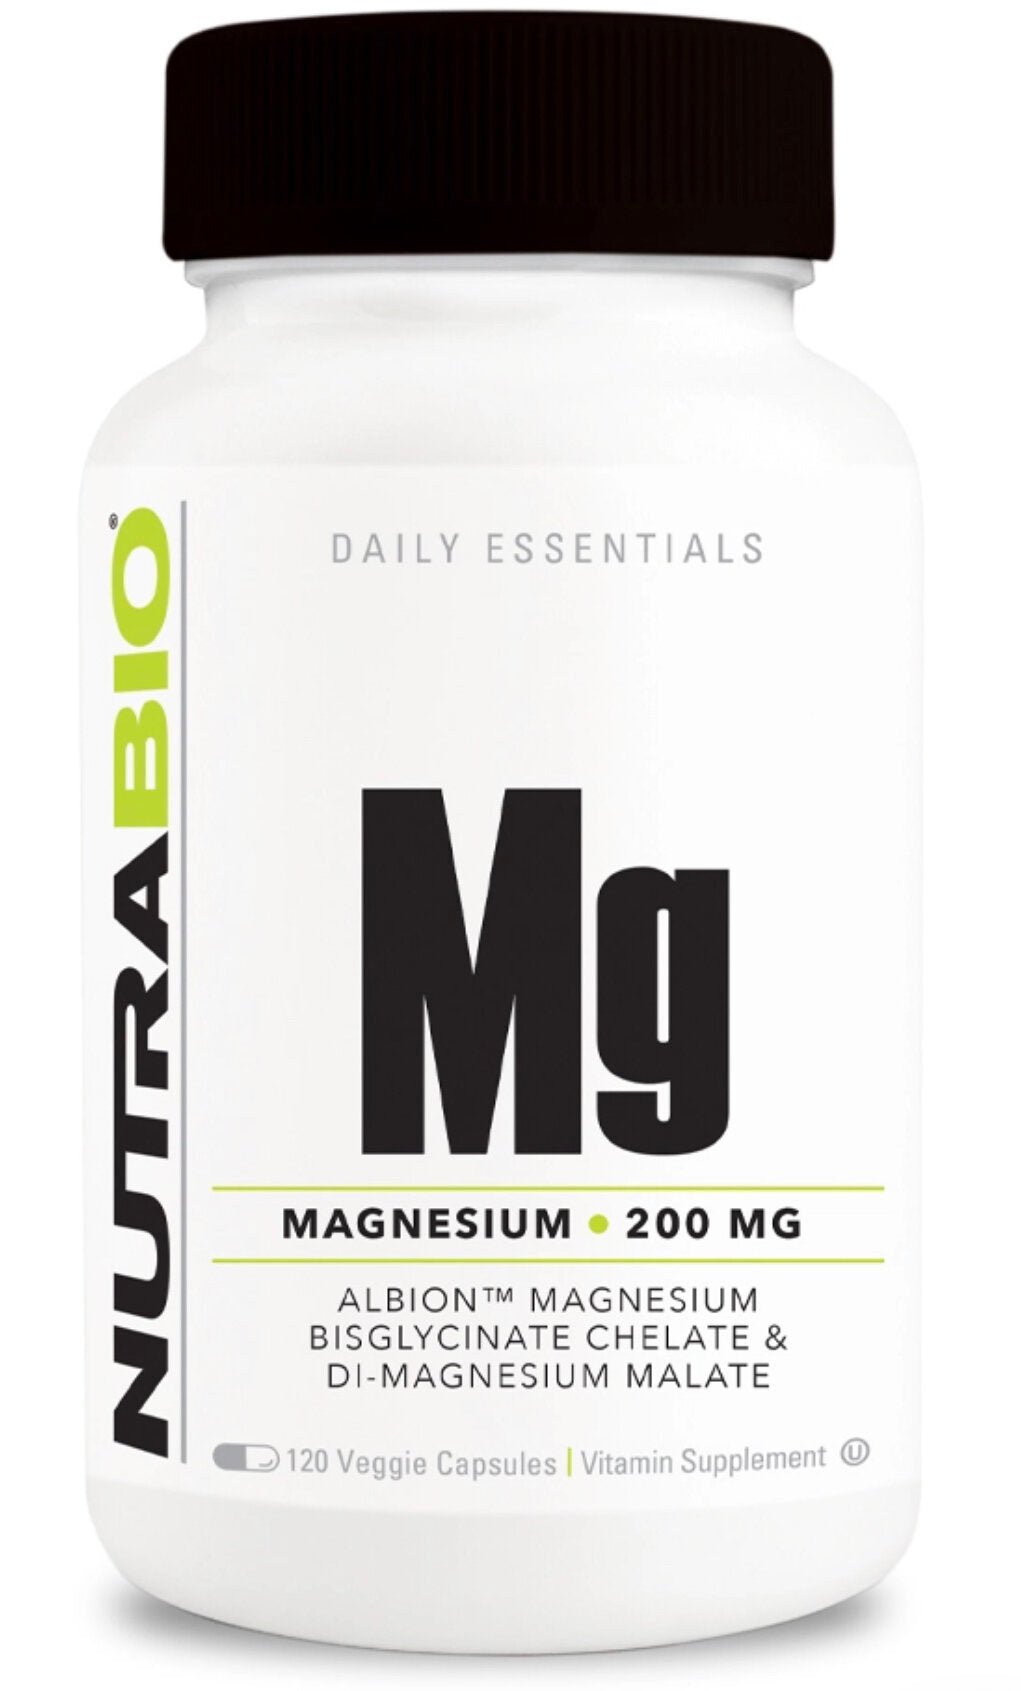 NutraBio- Magnesium (Mg) 120 Veggie Capsules - Krazy Muscle Nutrition vendor-unknownSQ7337334